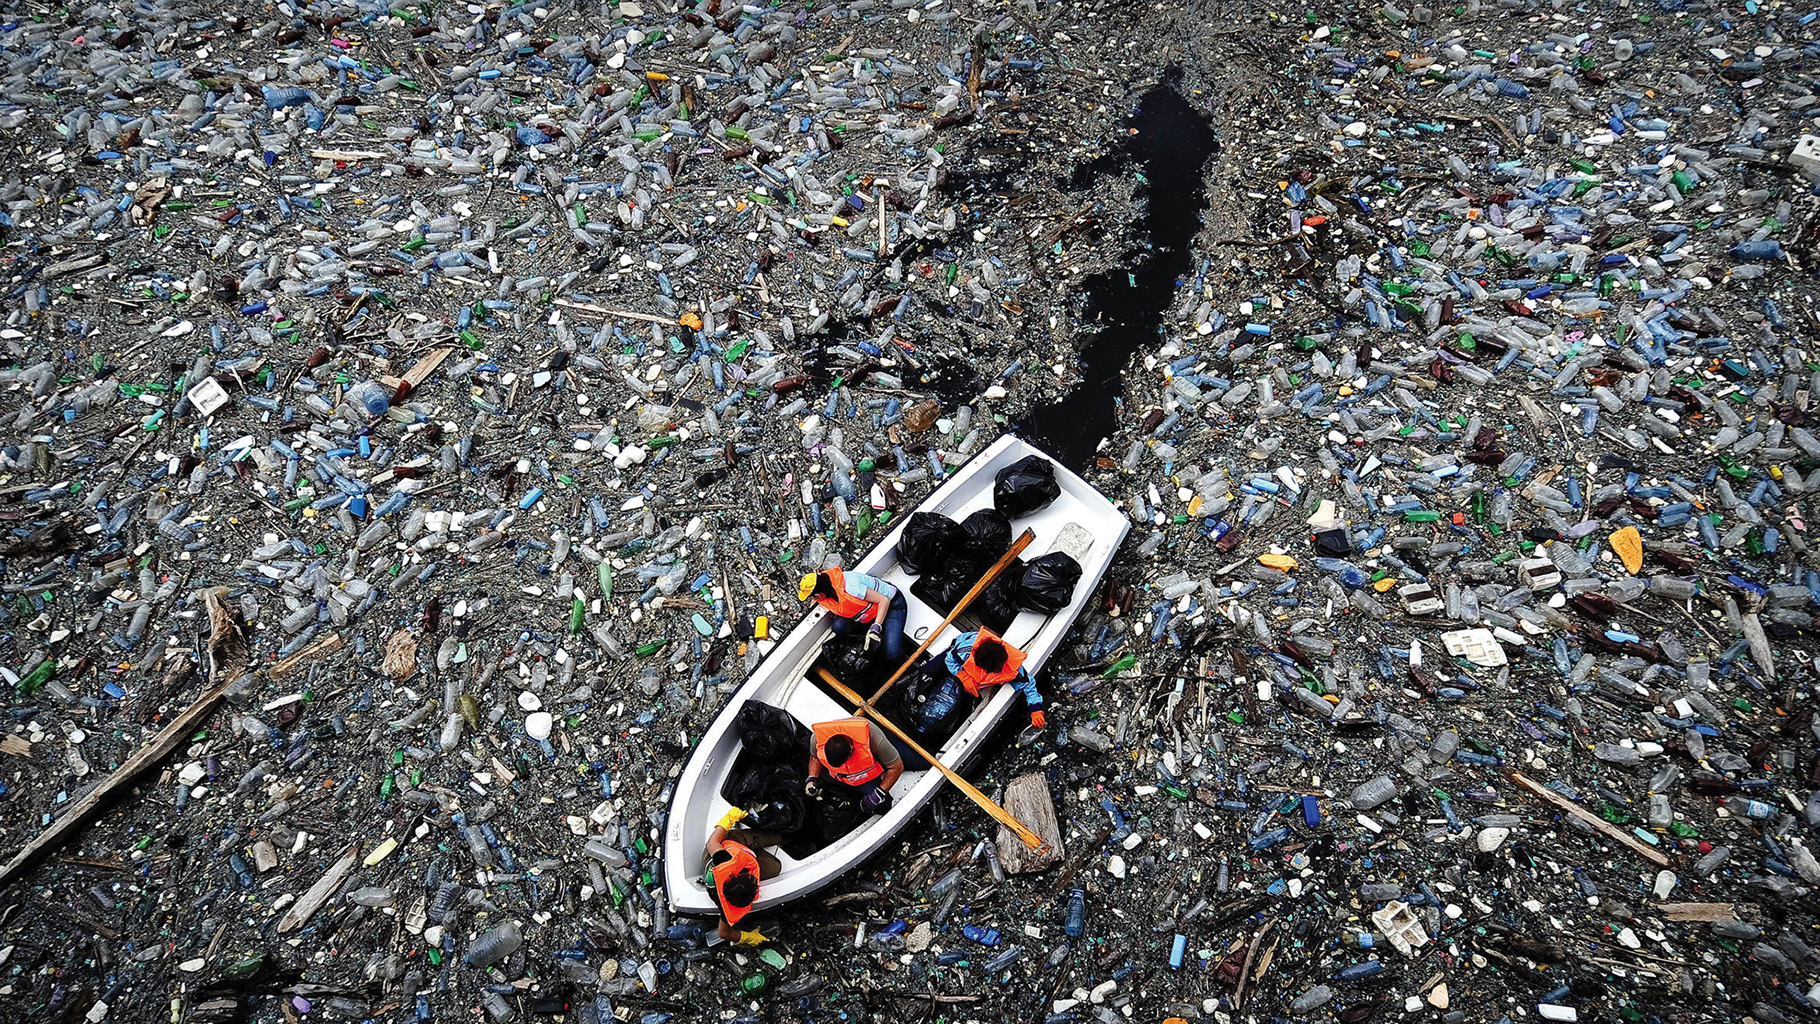 Confronting Ocean Plastic Pollution. The Pew Charitable Trusts